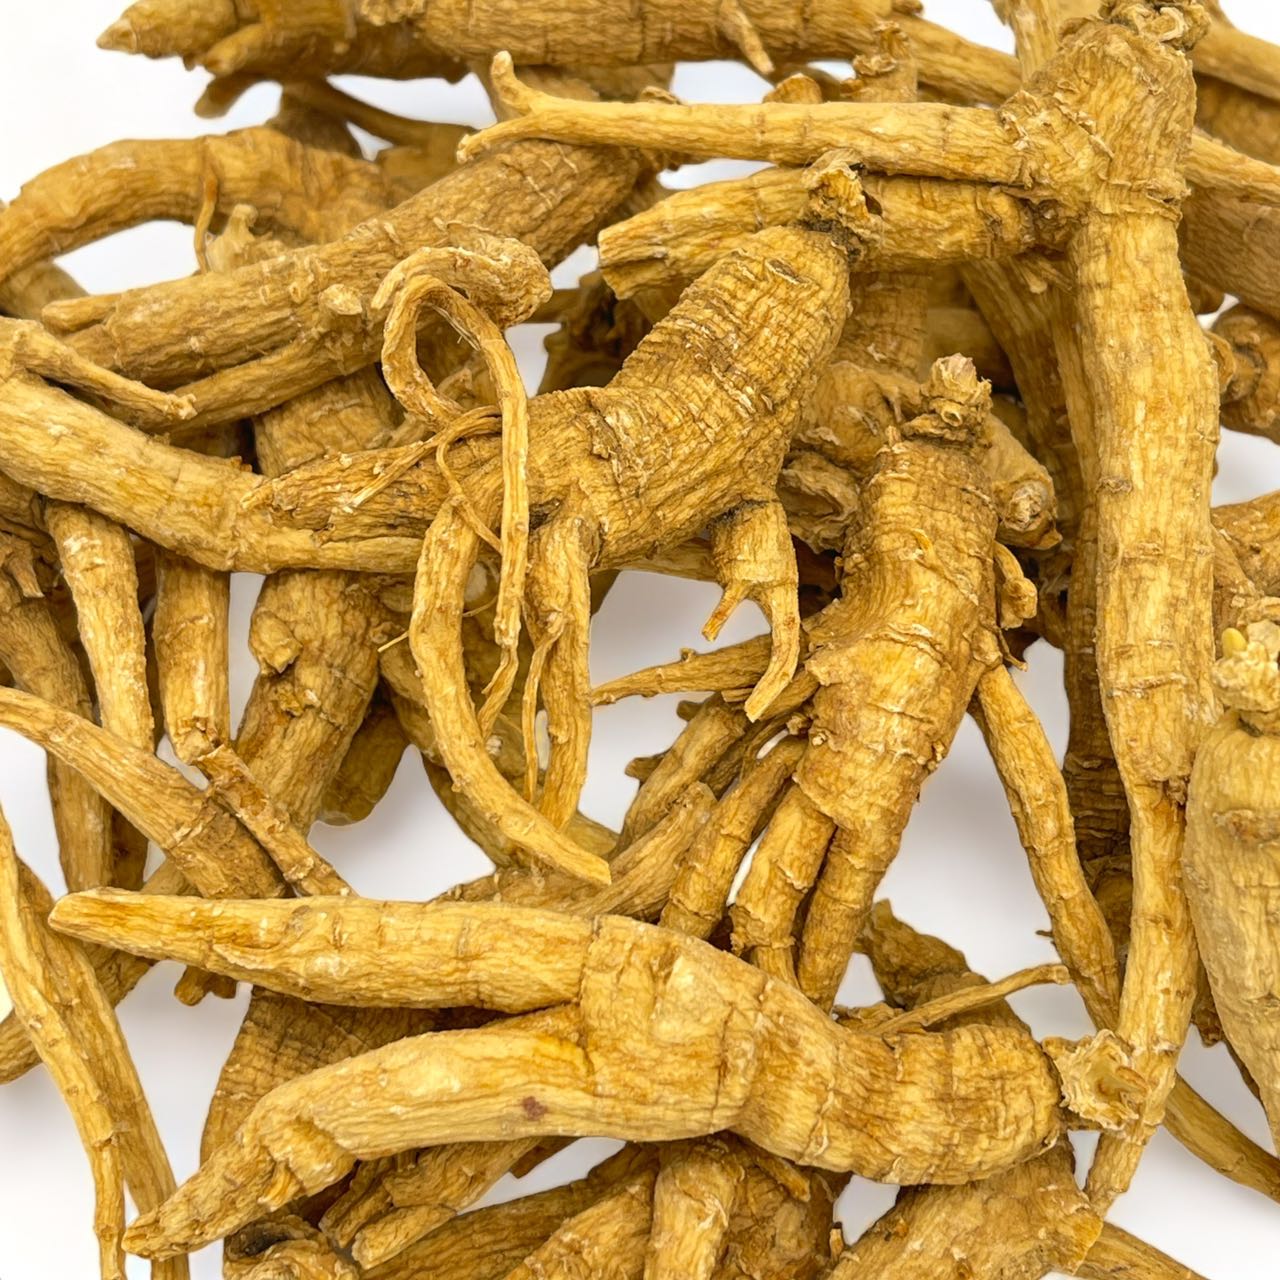 "NATIVE ULTRA" 5-Year Premium Canadian Ginseng Whole Roots, 454g/bag